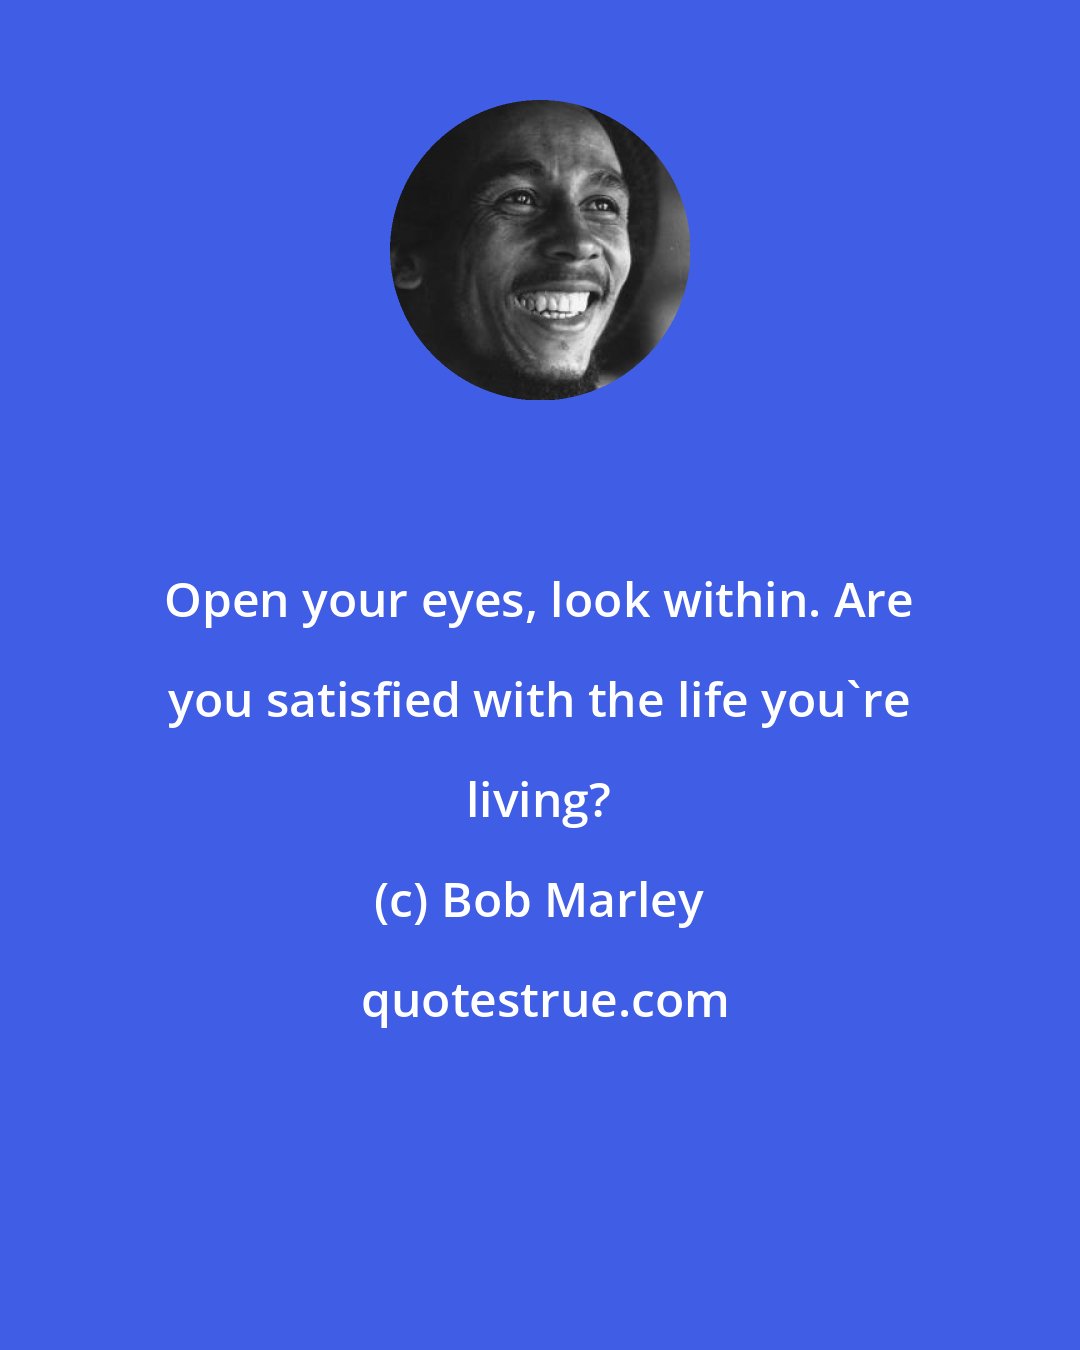 Bob Marley: Open your eyes, look within. Are you satisfied with the life you're living?